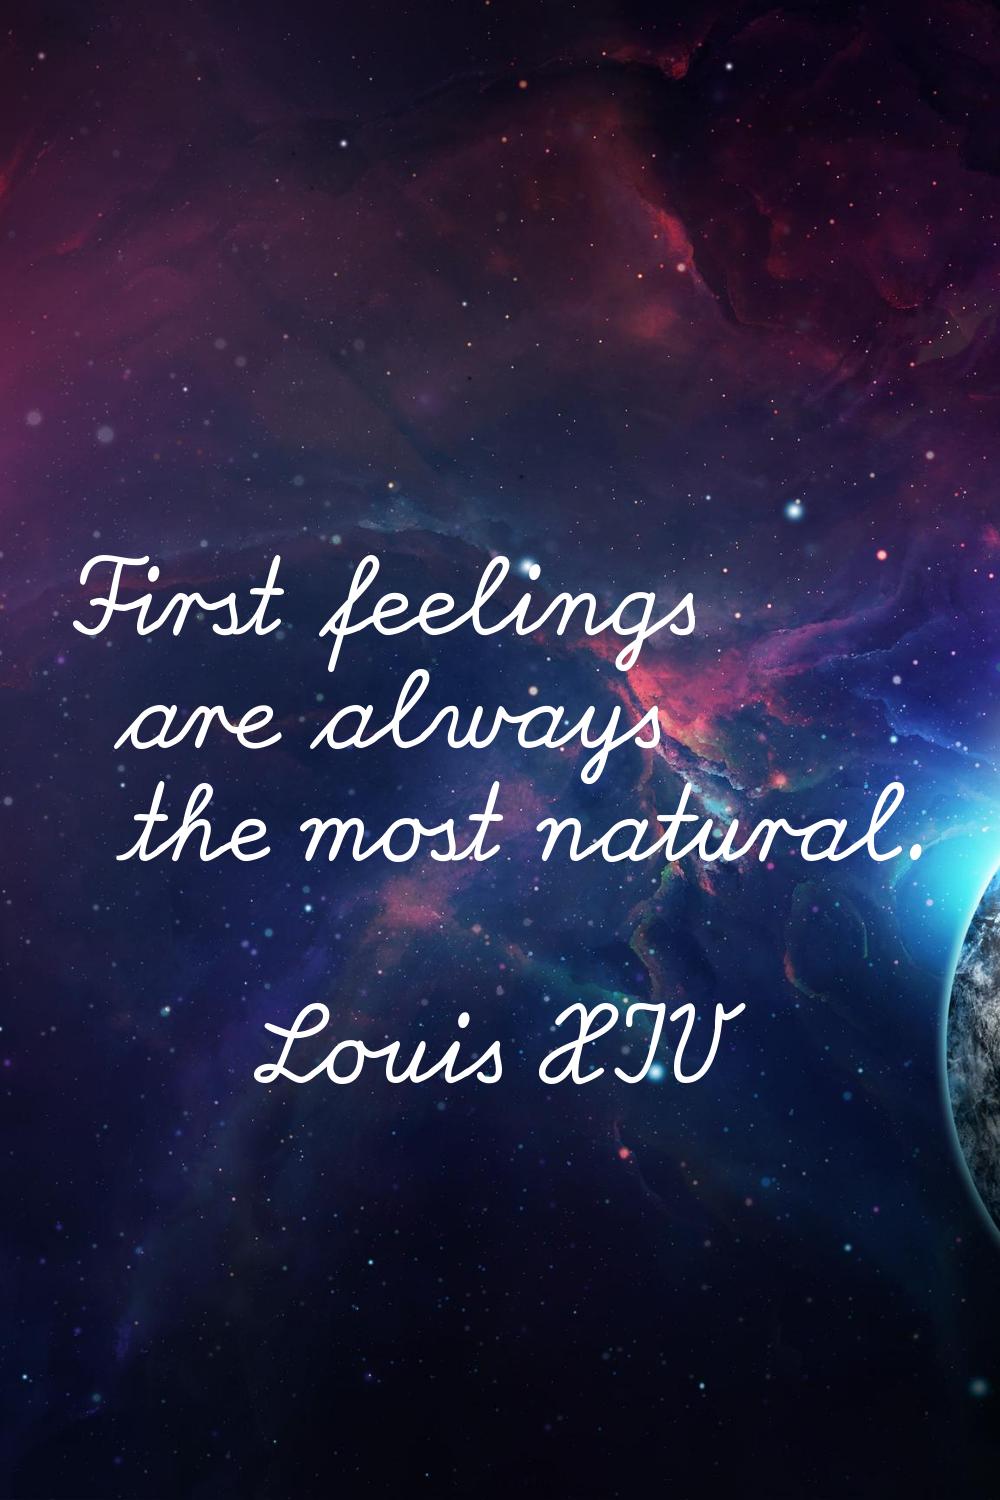 First feelings are always the most natural.